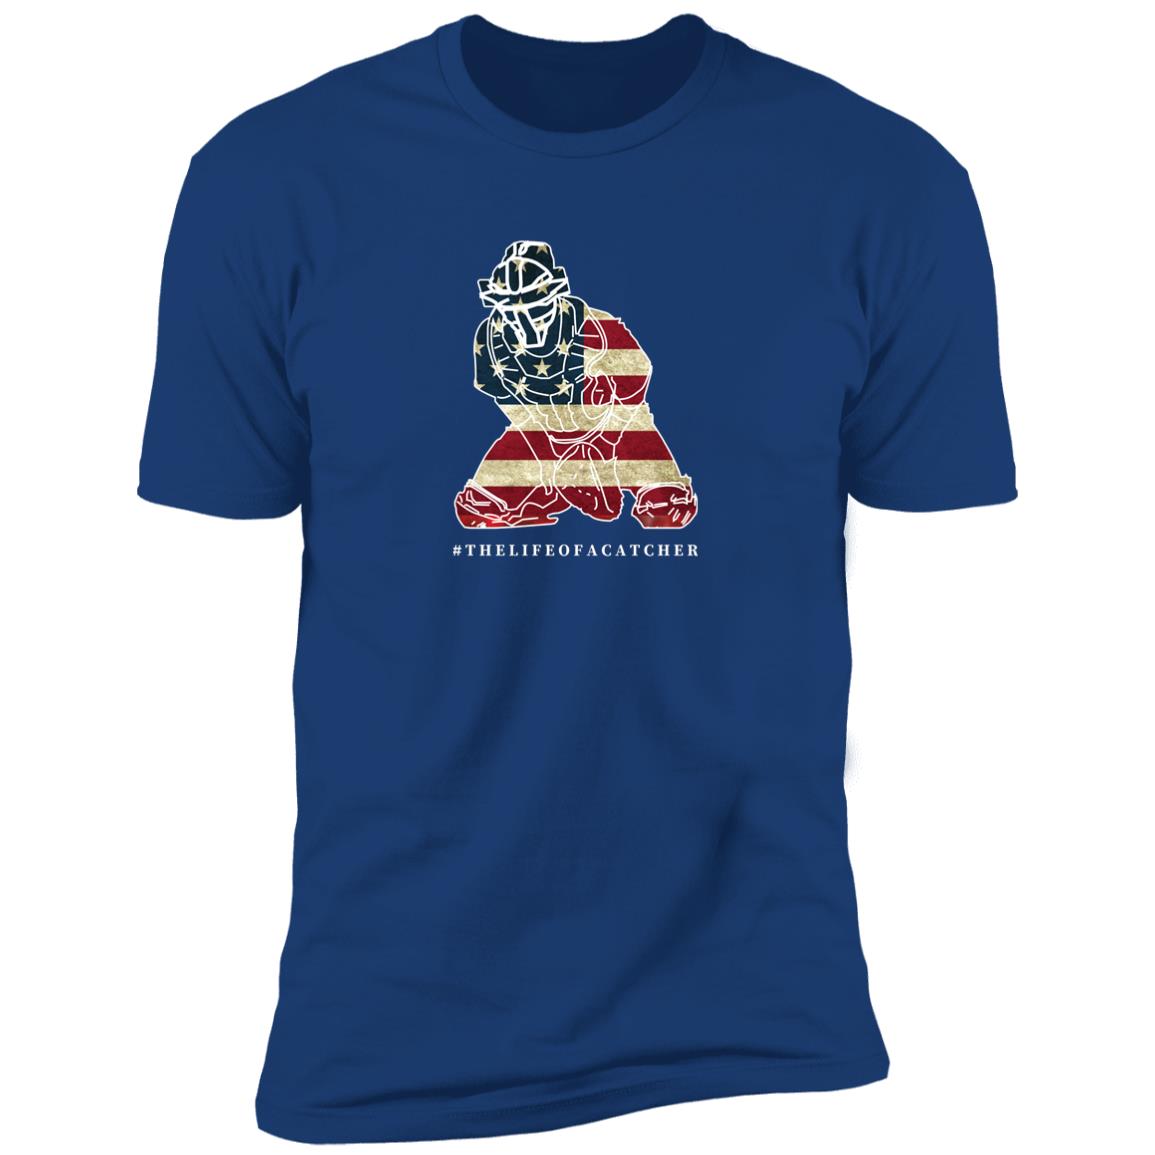 The-Catching-Guy-Flag-tee-blue-catcher